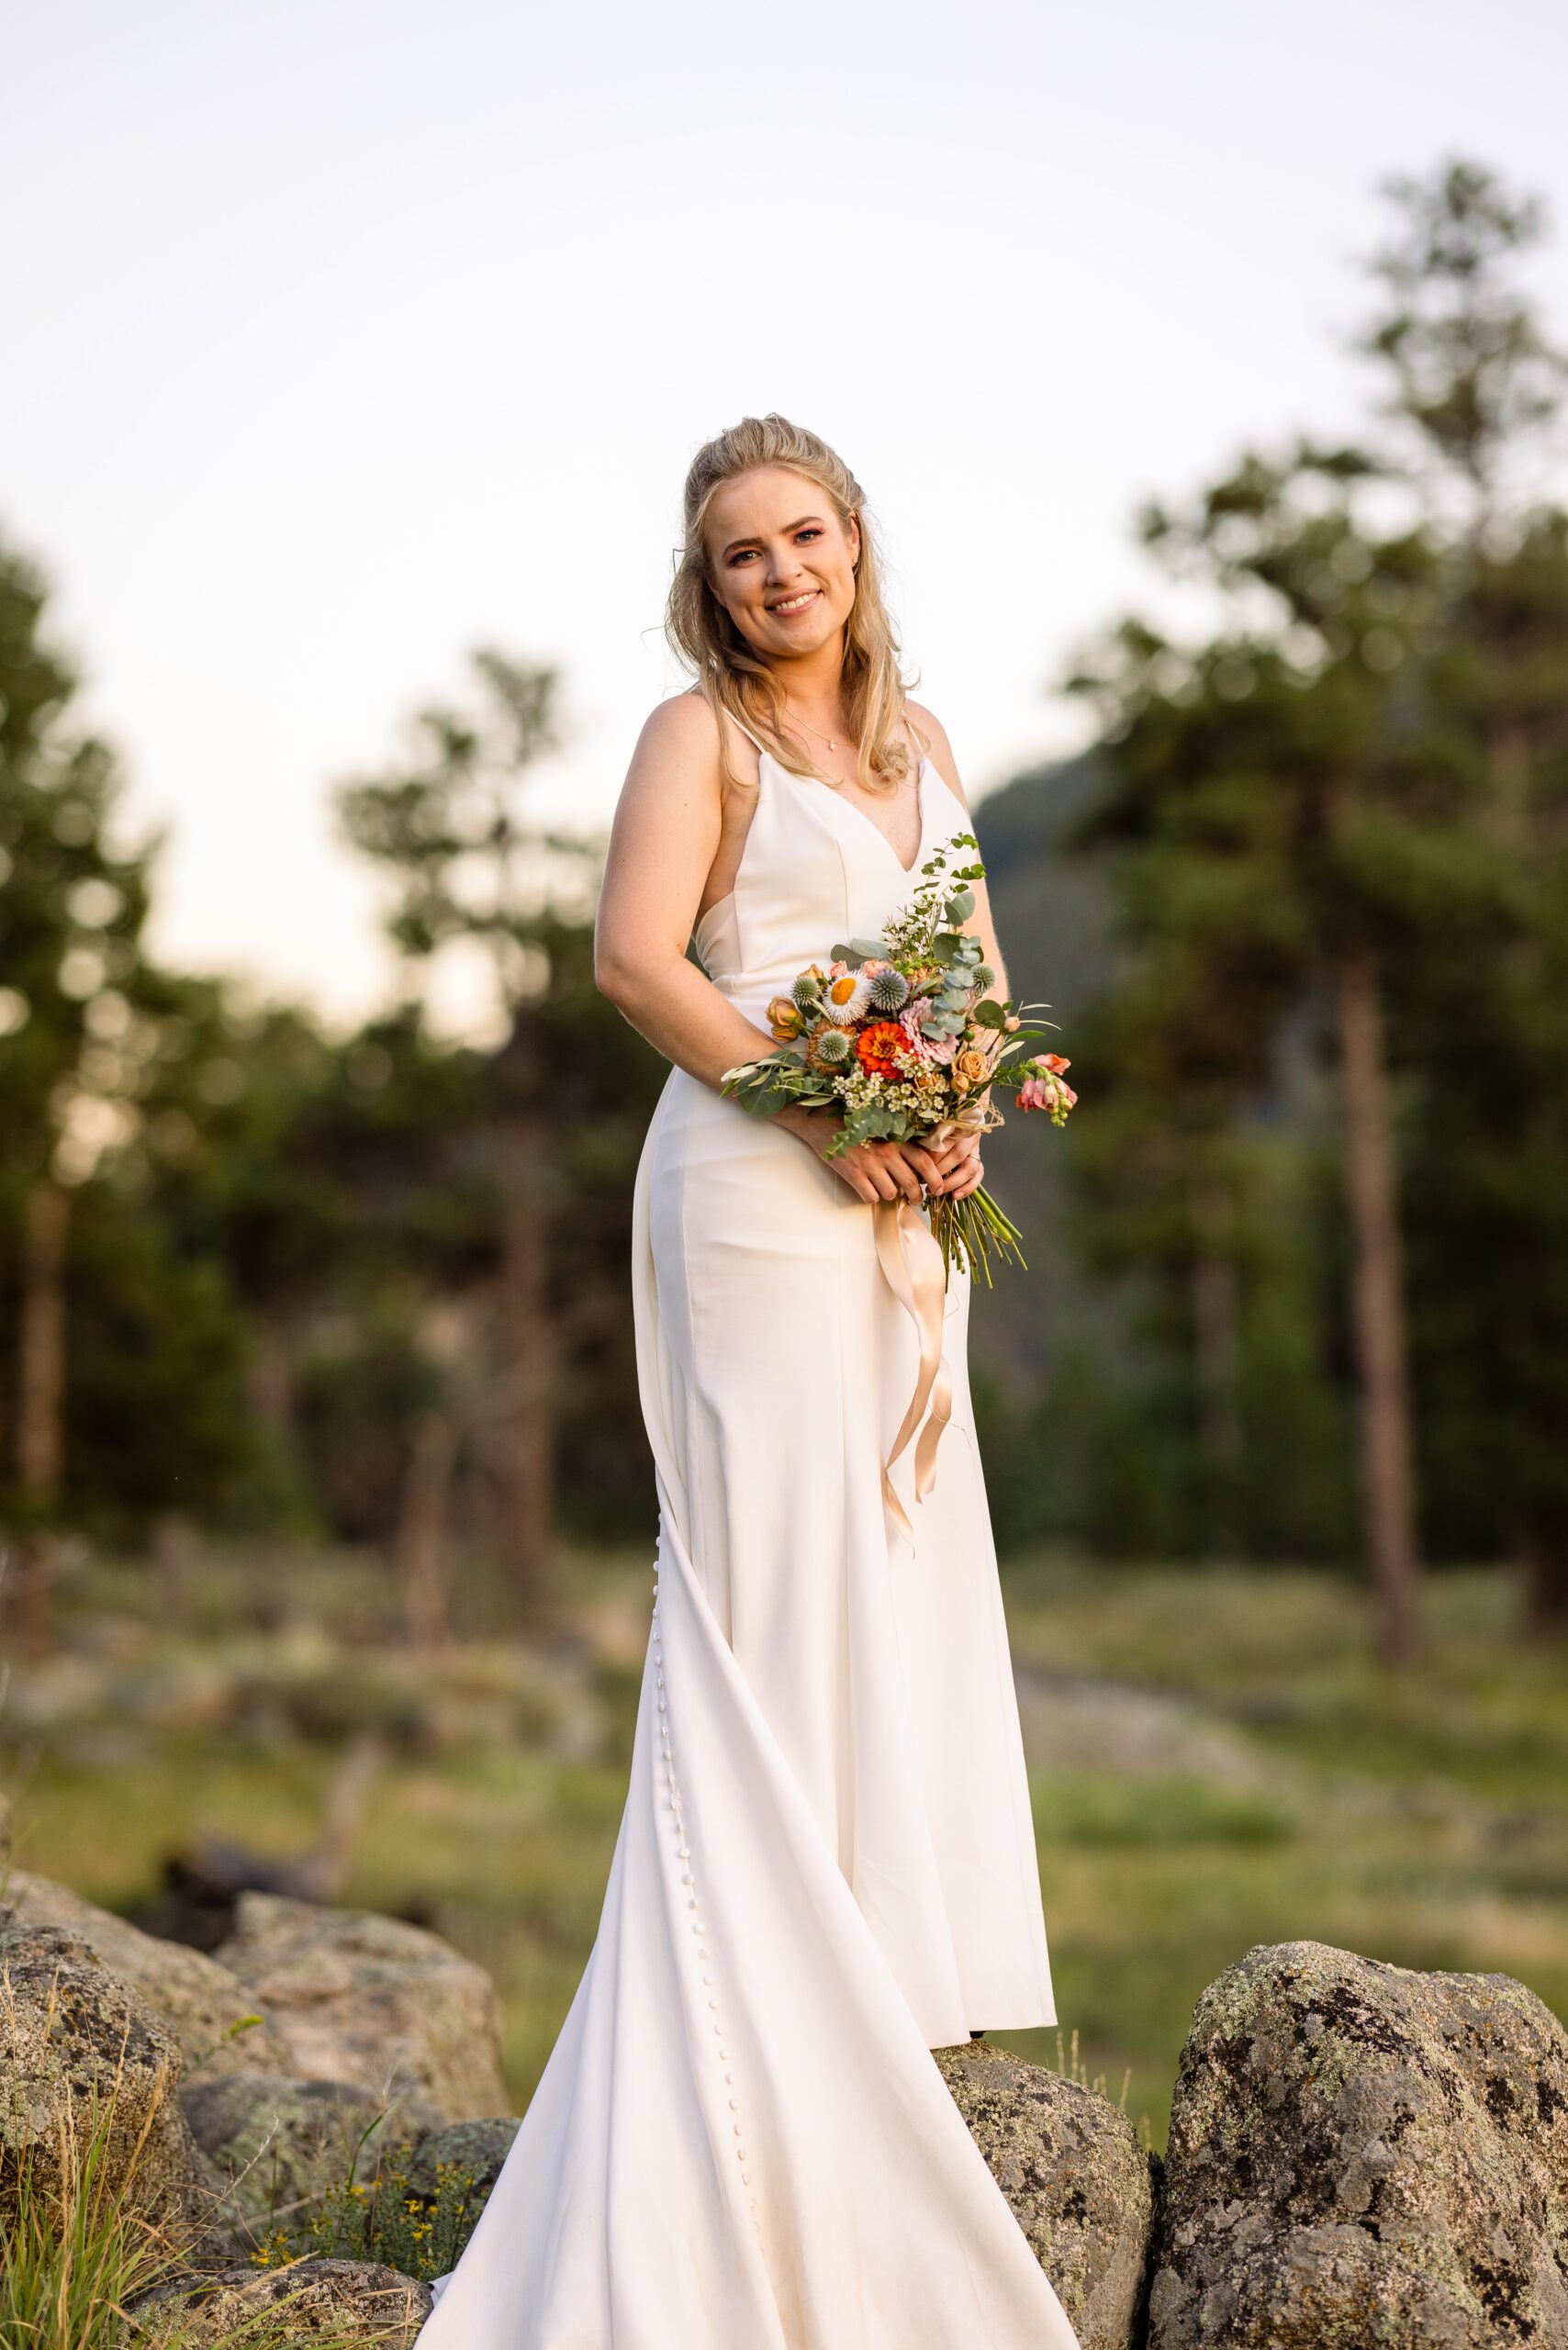 The beautiful bride in a gorgeous white gown after her Sunrise Amphitheater wedding.